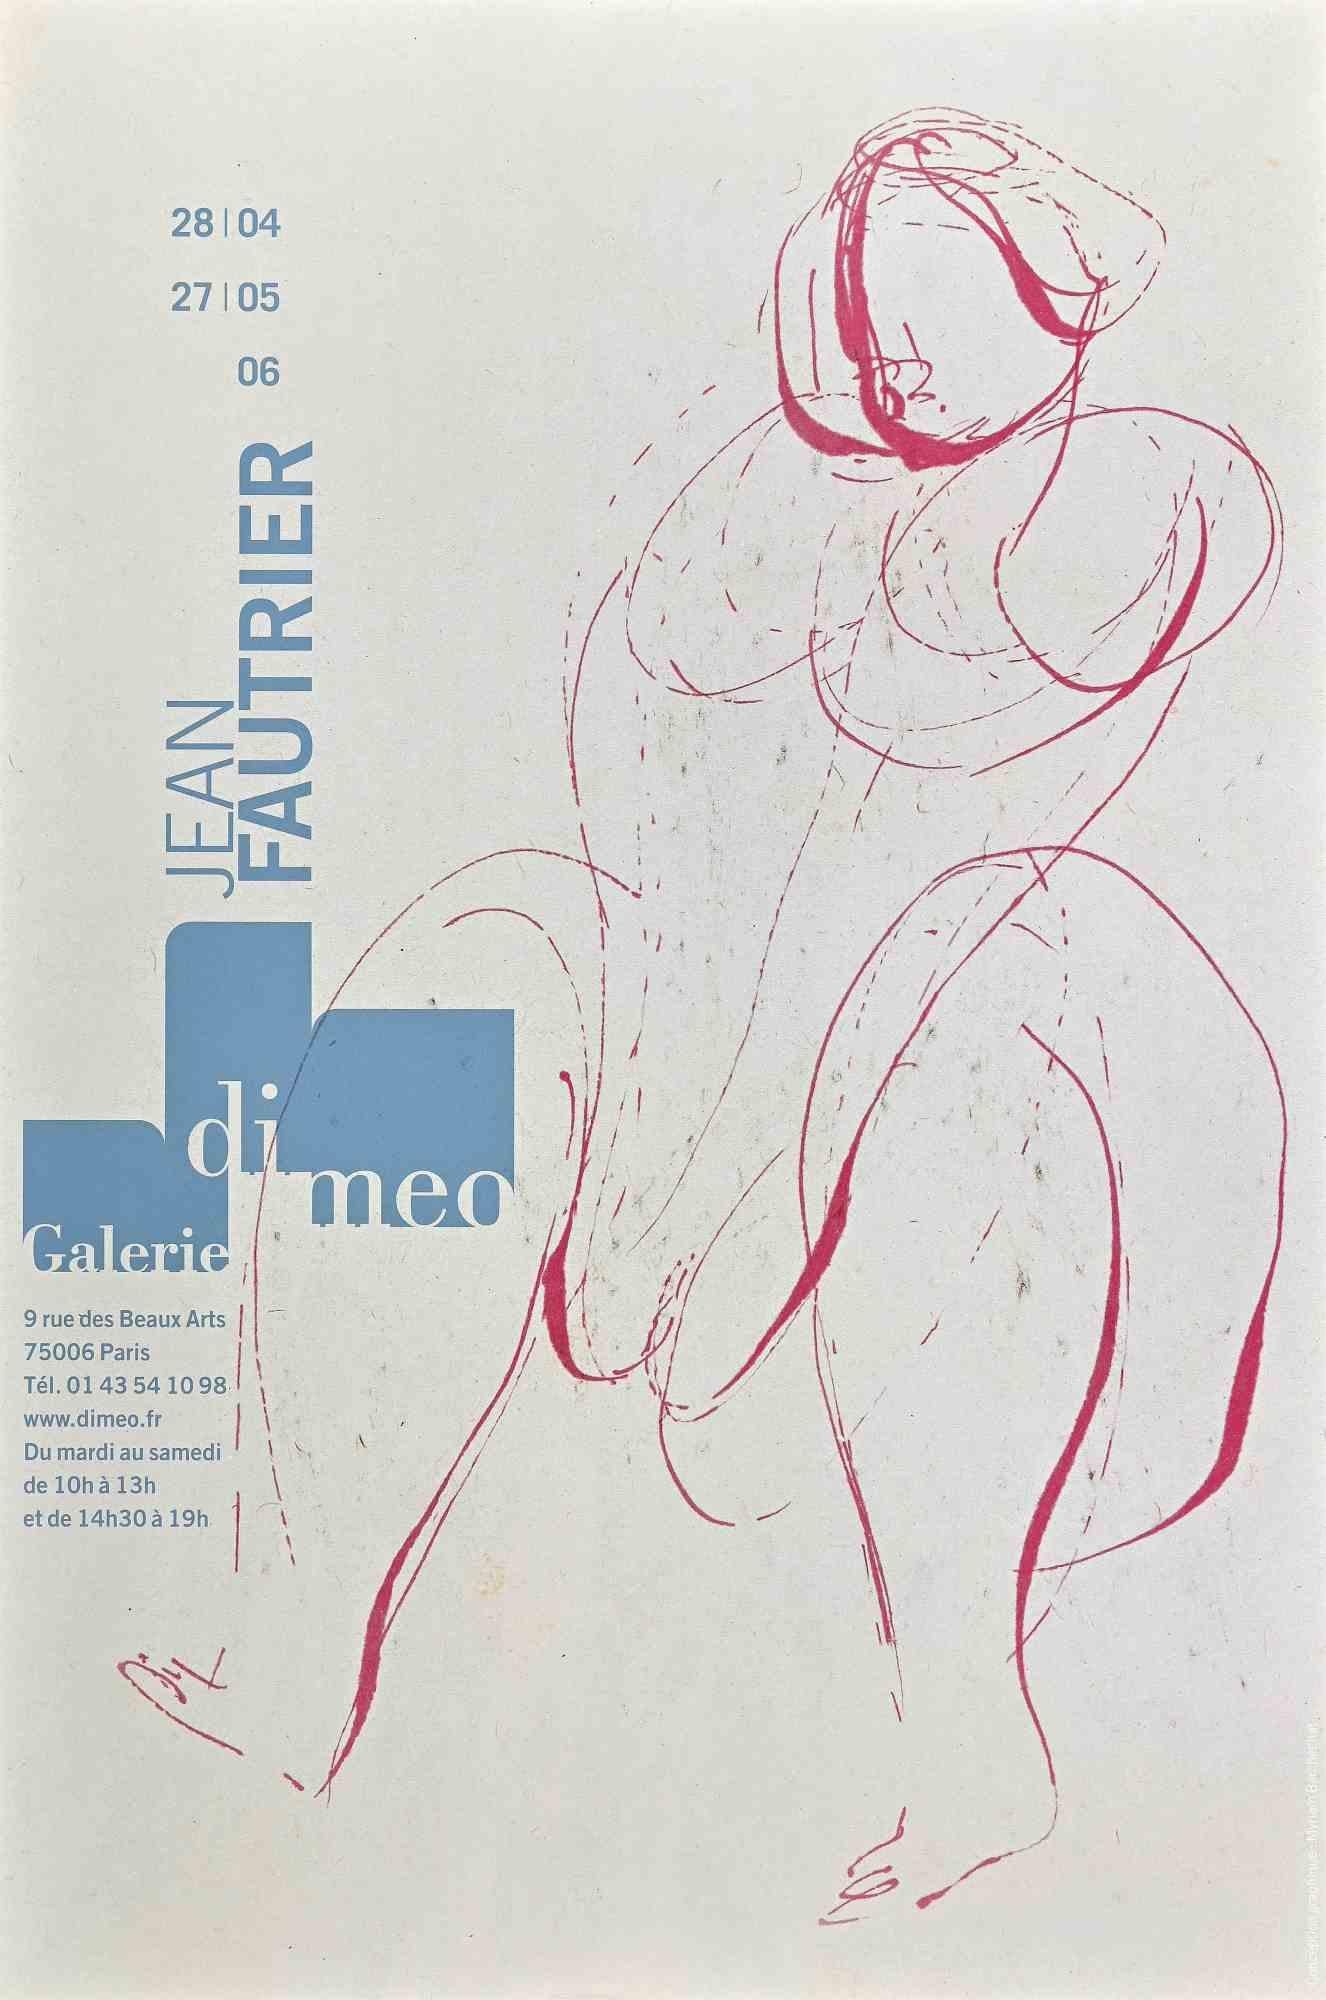 Jean Fautrier - Exhibition Poster is an Offset print realized for the exhibition of Jean Fautrier at Galerie Di Meo, Paris.

The artwork is represented in a well-balanced composition.

 